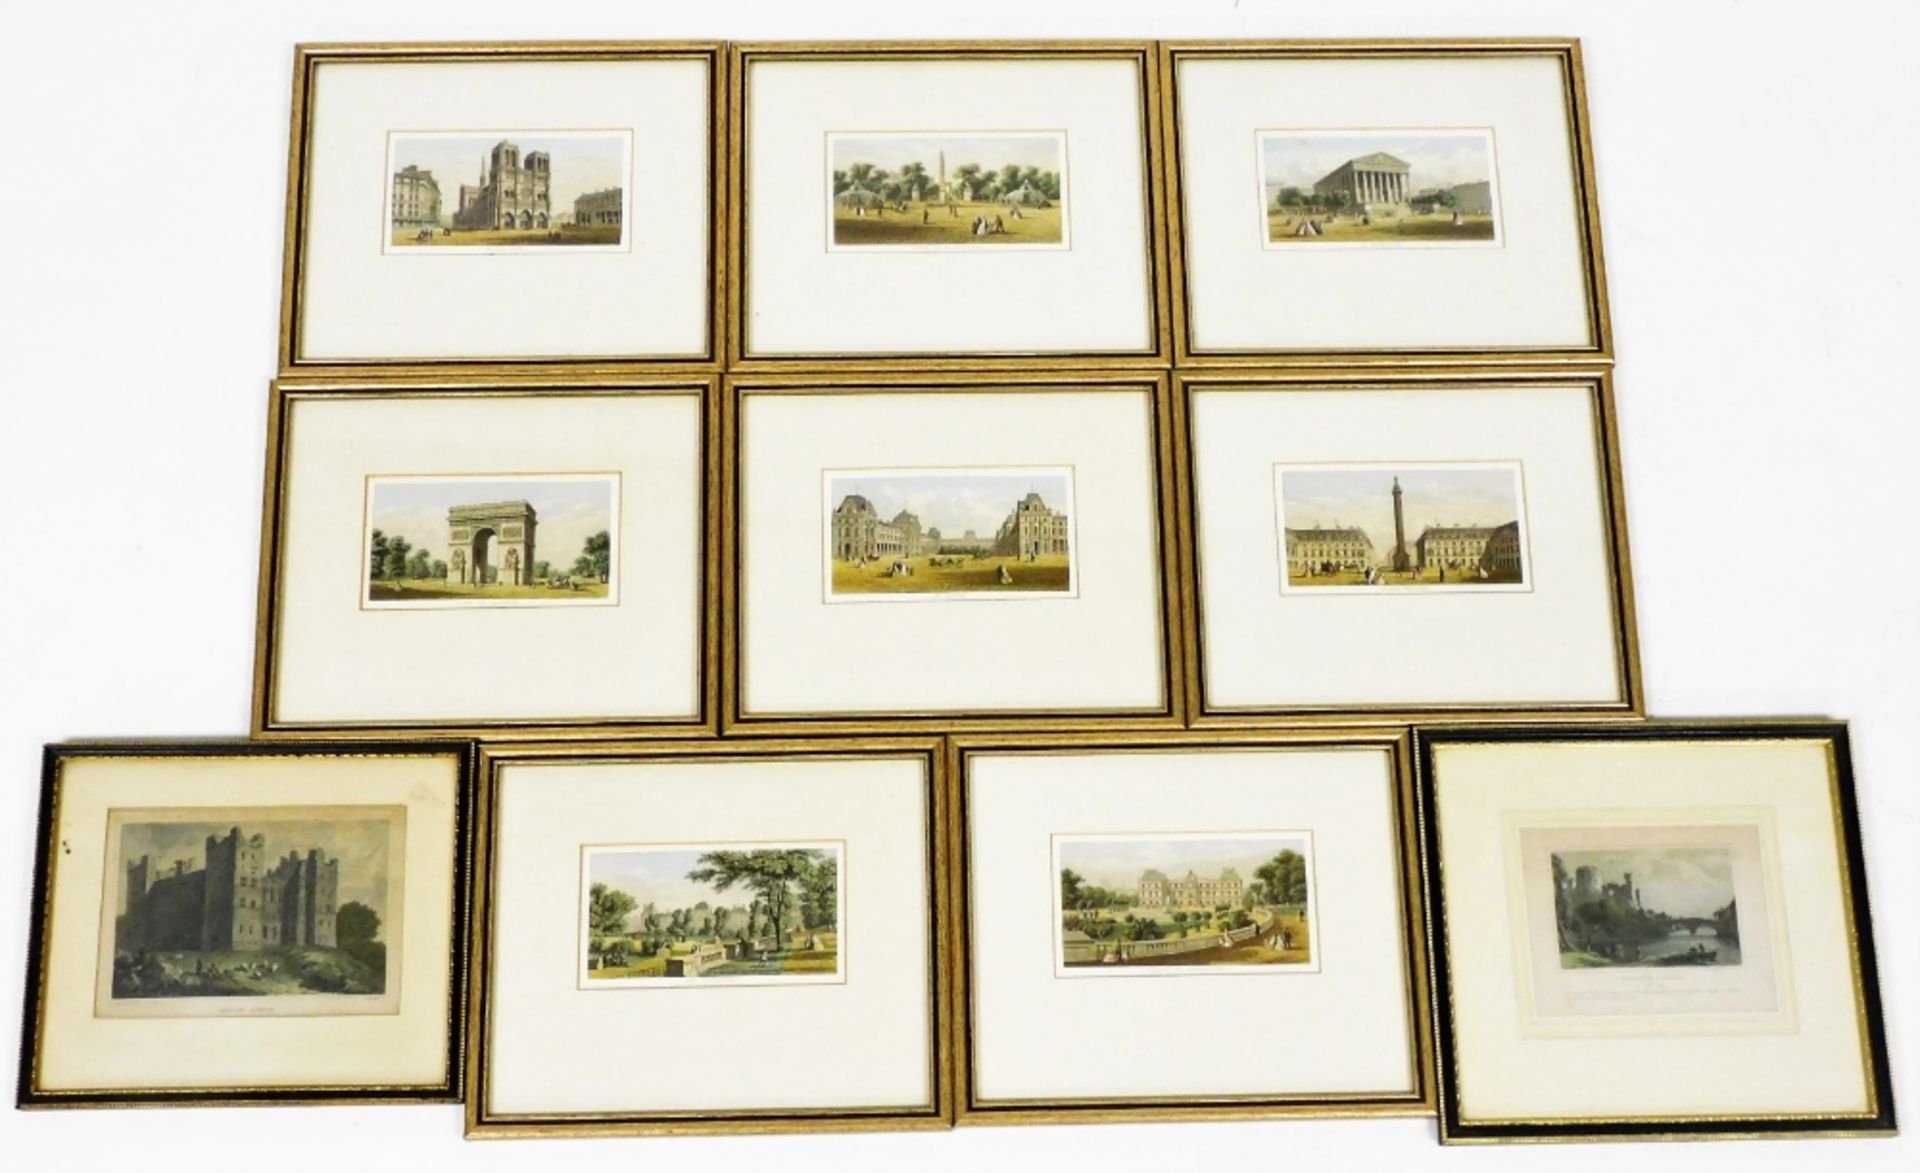 A group of colour engravings depicting Parisian scenes, to include Notre Dame, The Louvre, Les Tuile